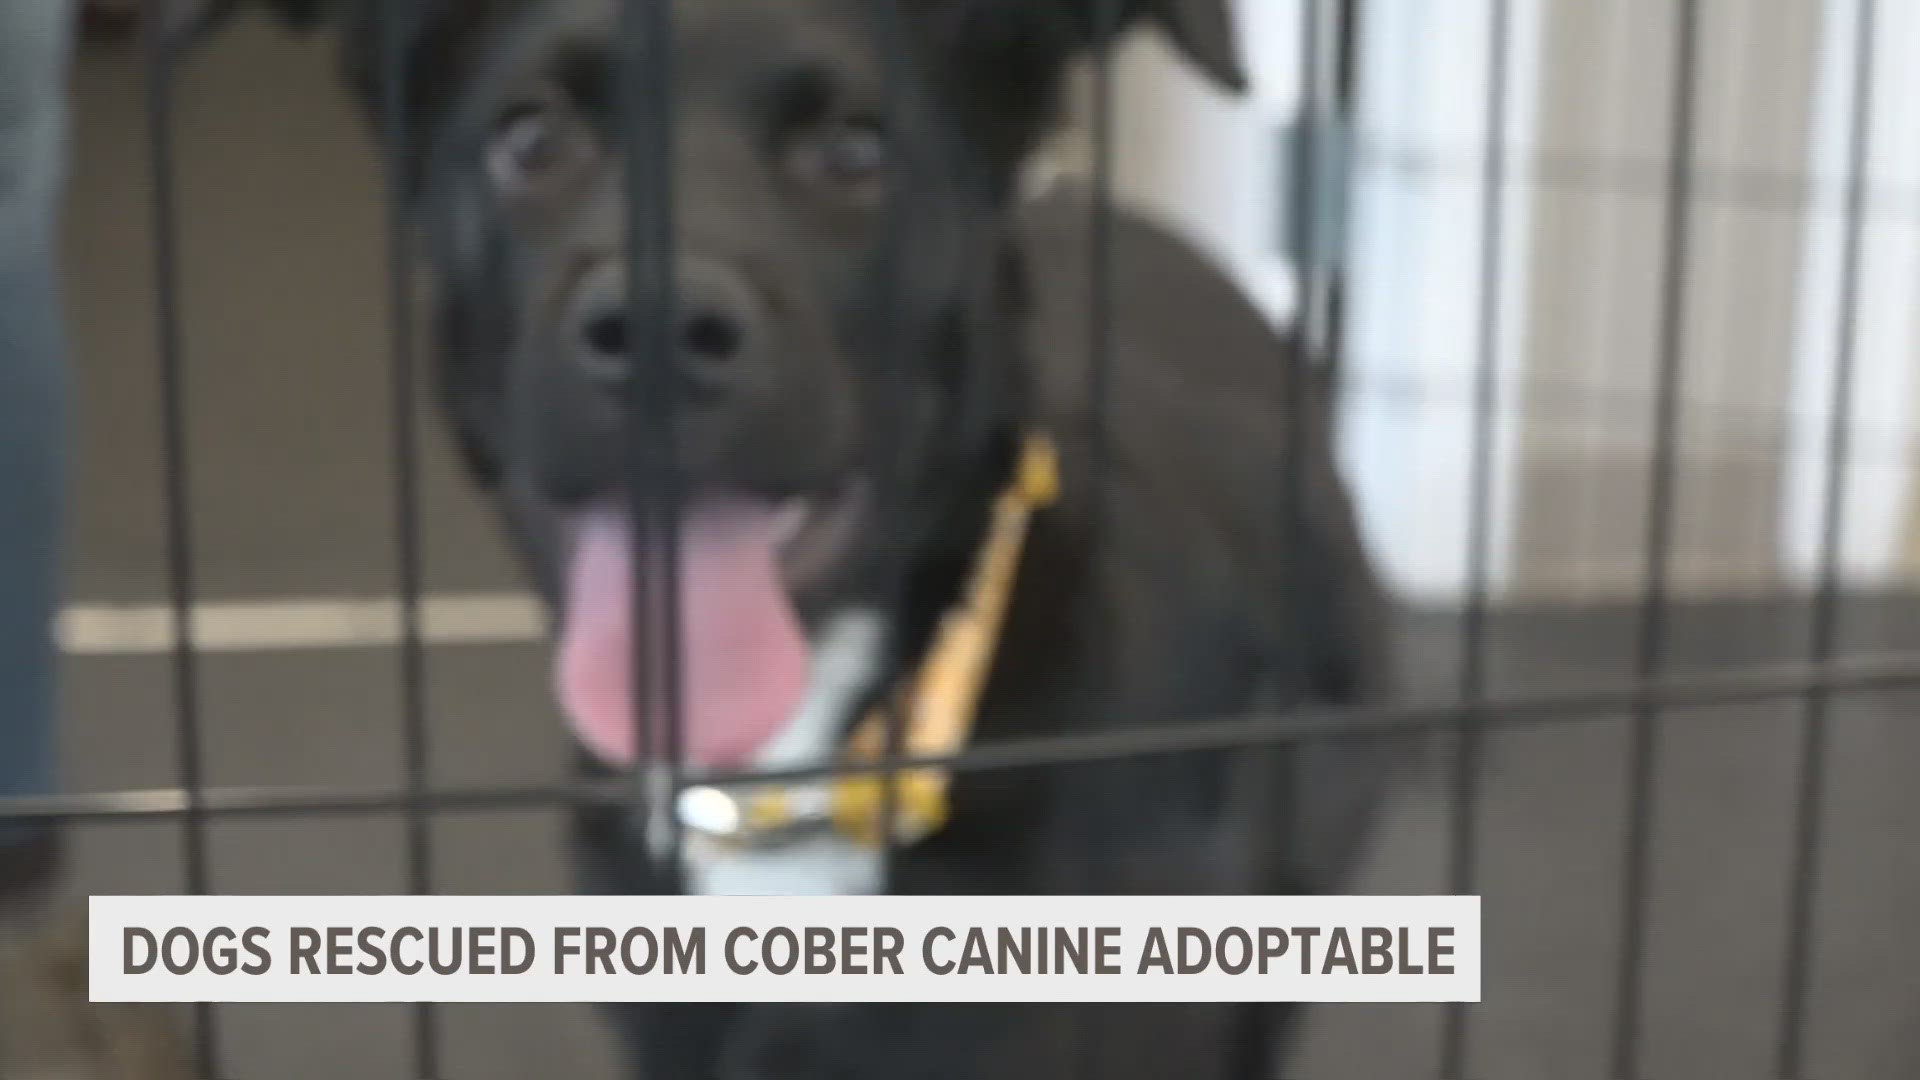 Harbor Humane says dogs rescued from Cober Canines now adoptable.